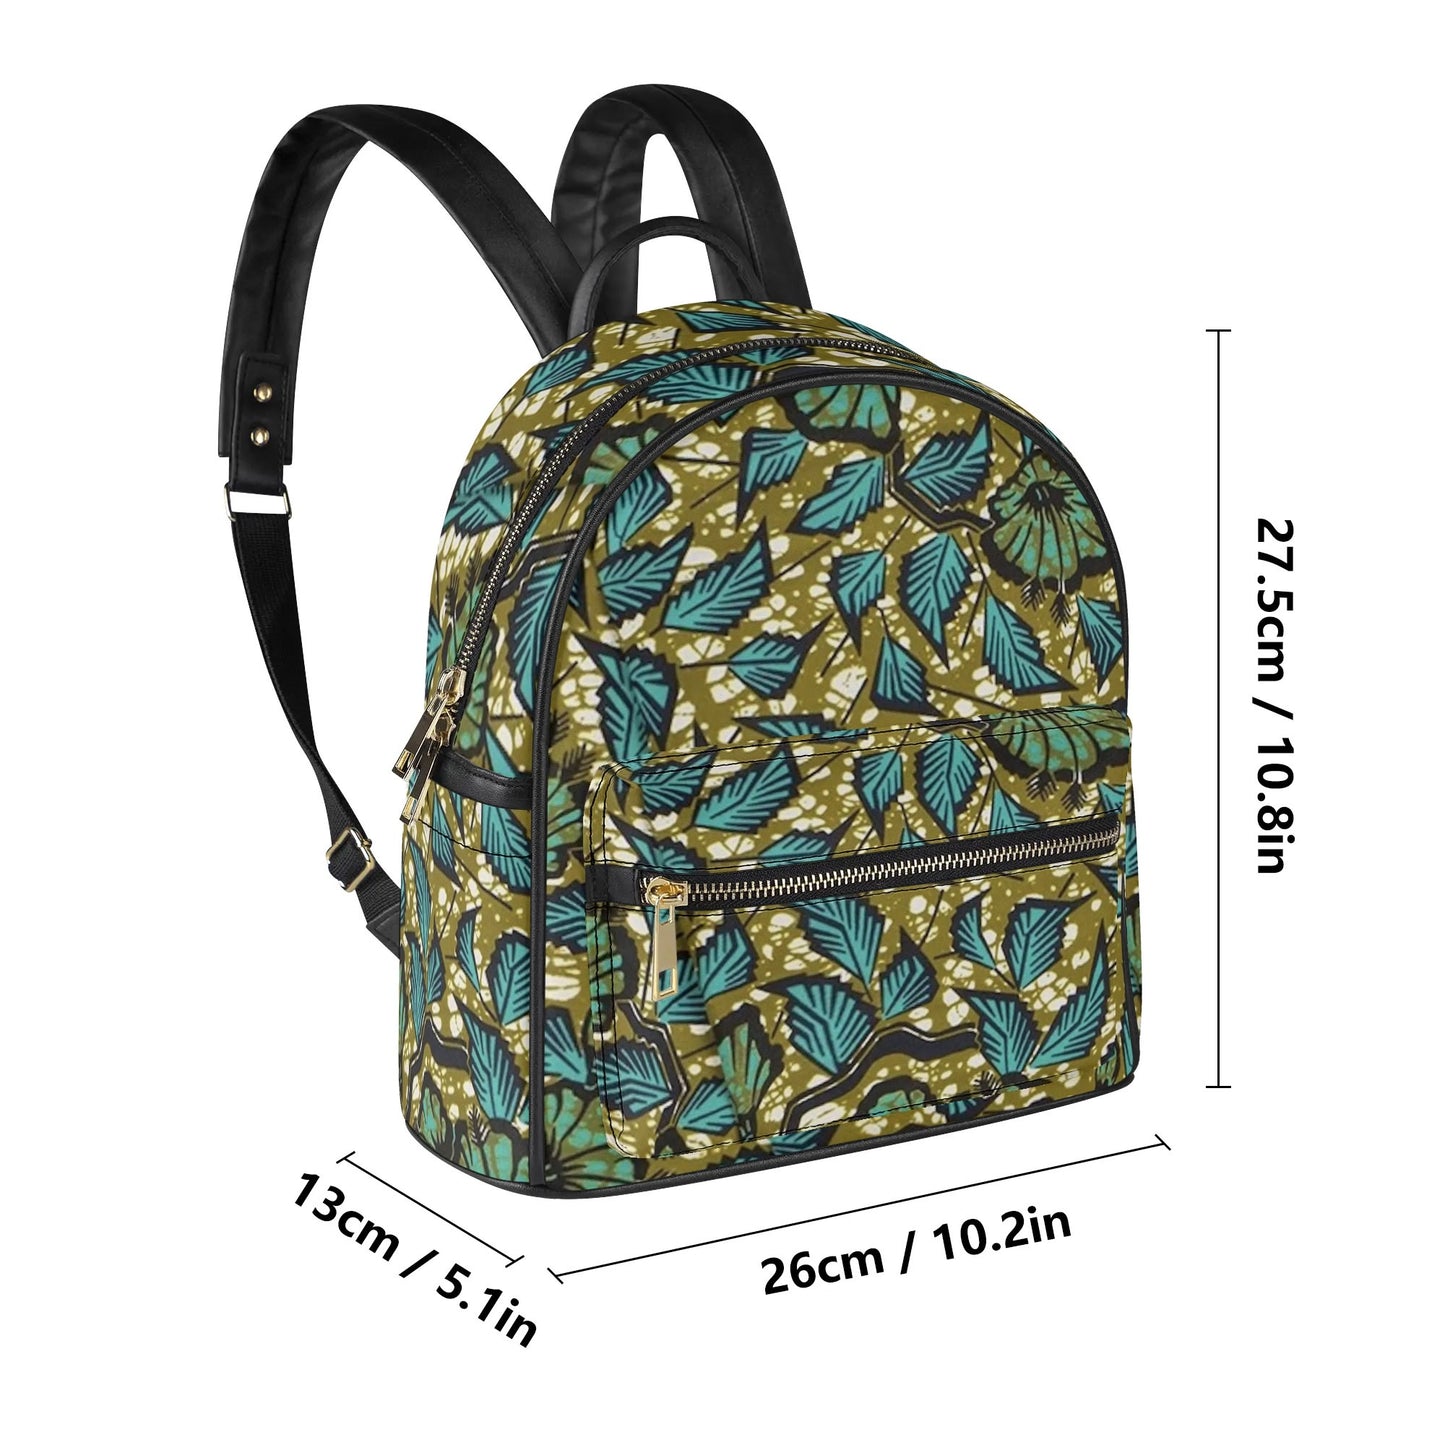 FZ AFRICAN PRINT PU Leather Backpack popcustoms